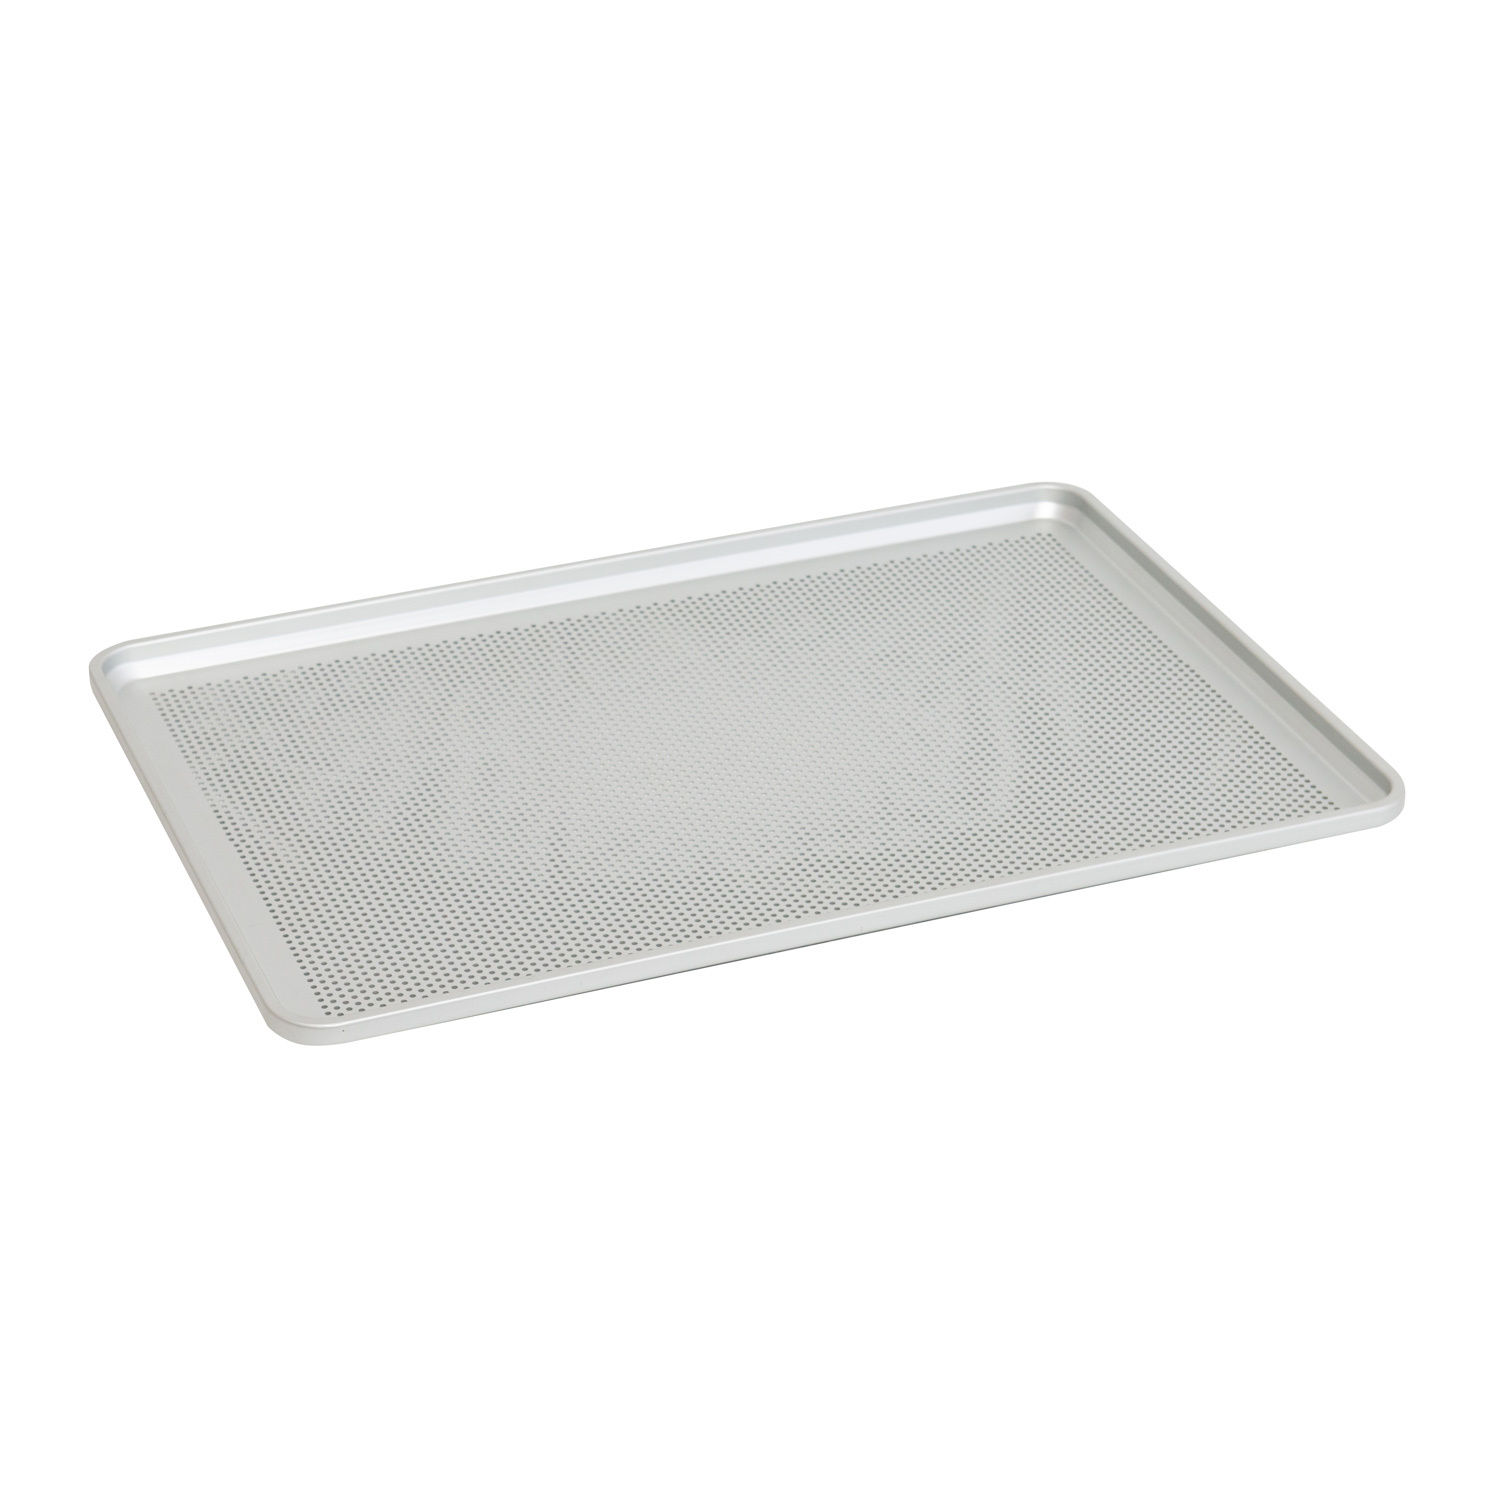 11gn Perforated Roasting and Baking Trays